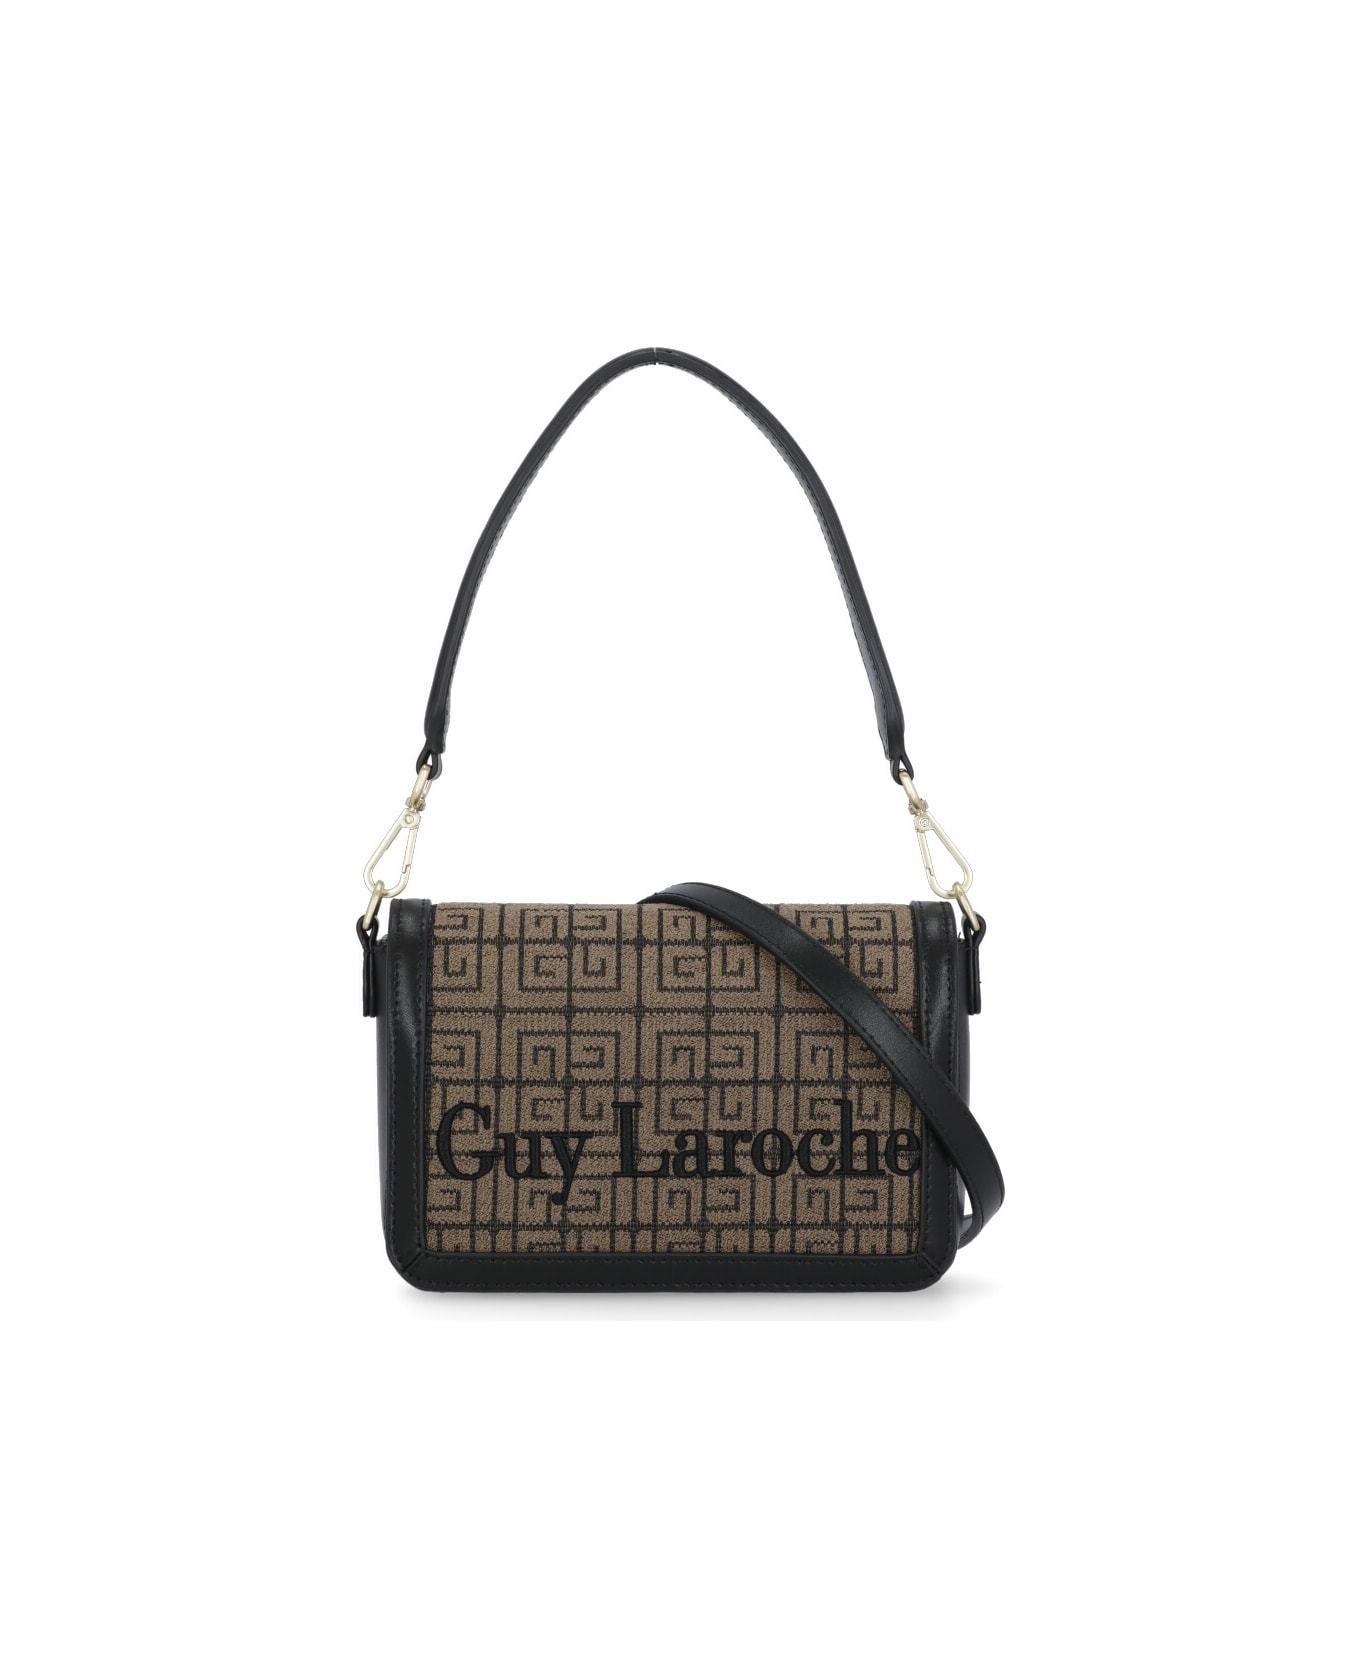 Guy Laroche women's bag with all-over logo Brown